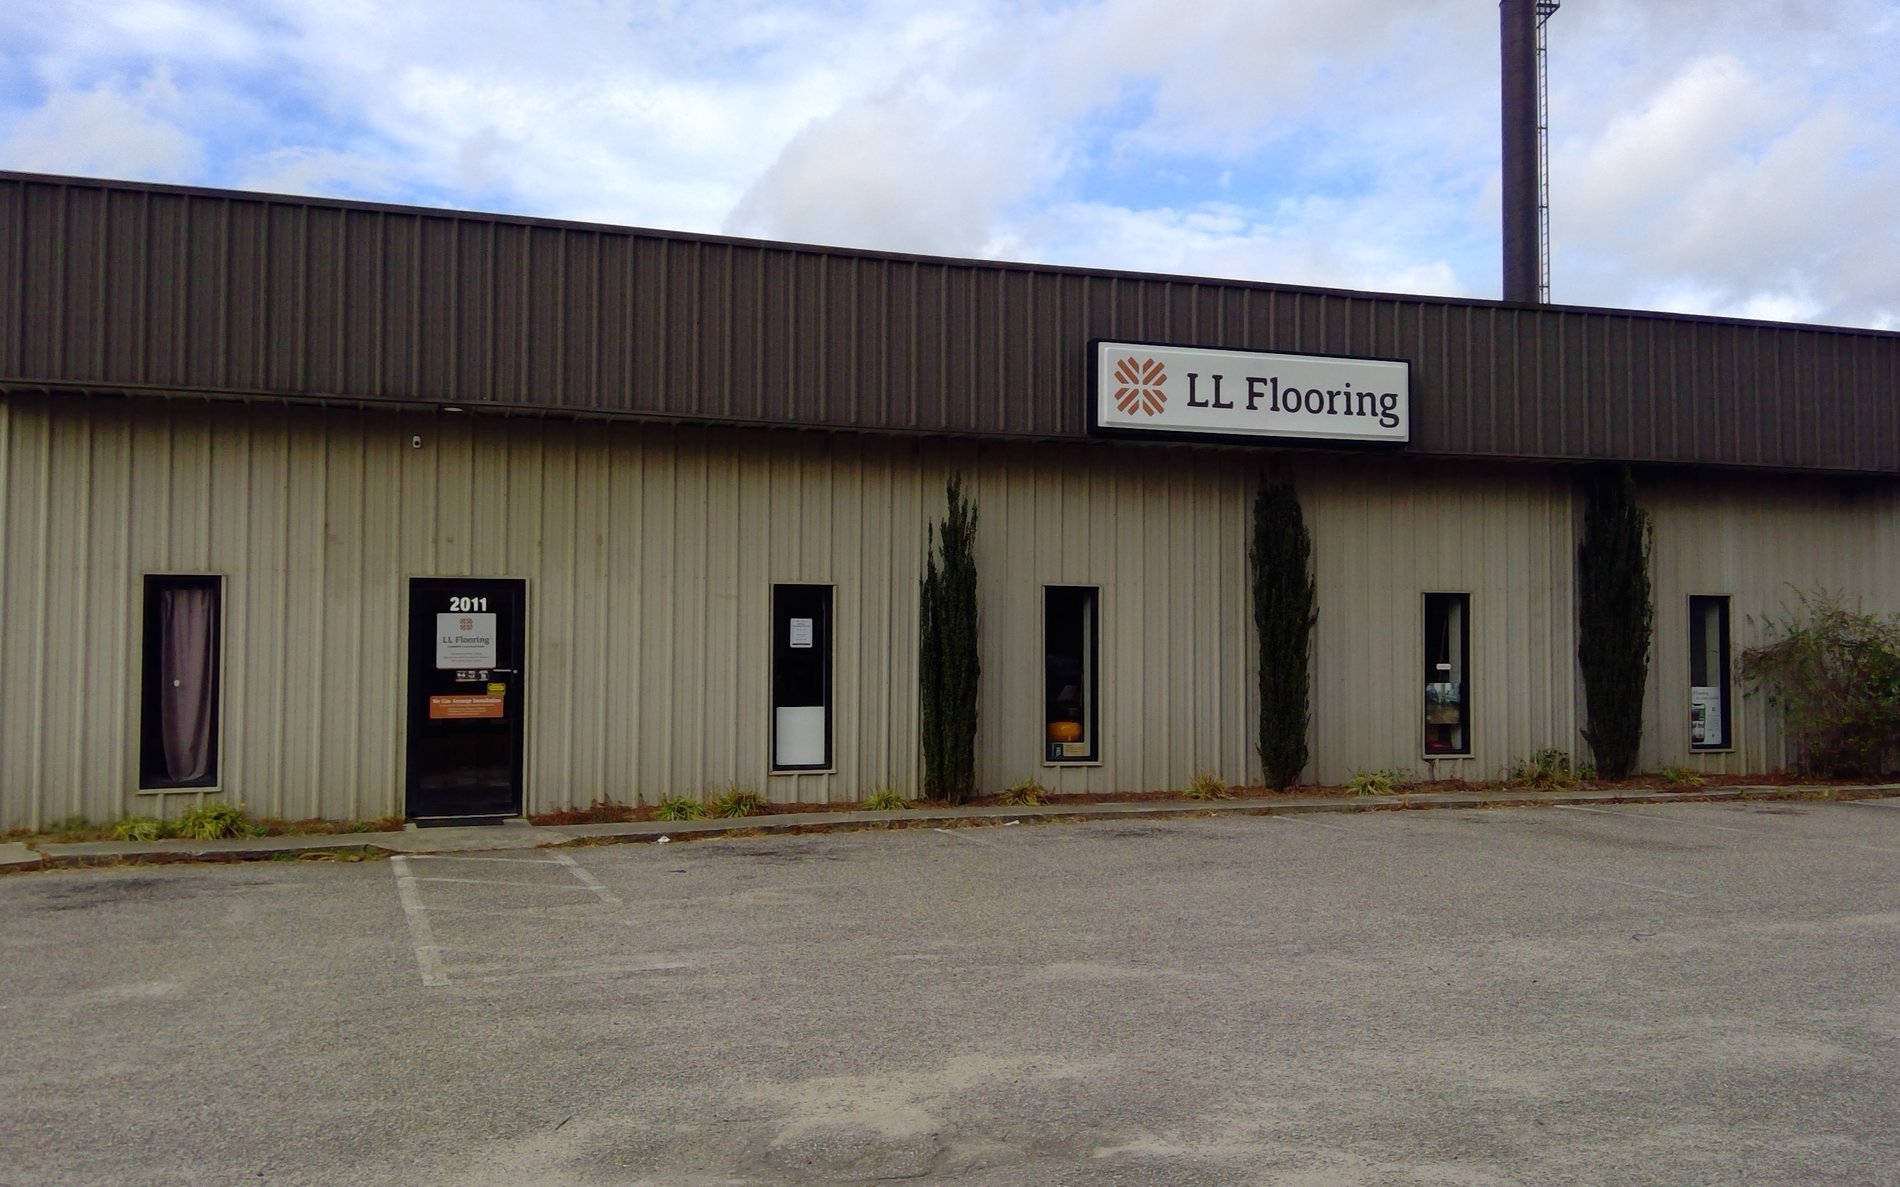 LL Flooring #1186 Florence | 2011 North Cashua Drive | Storefront